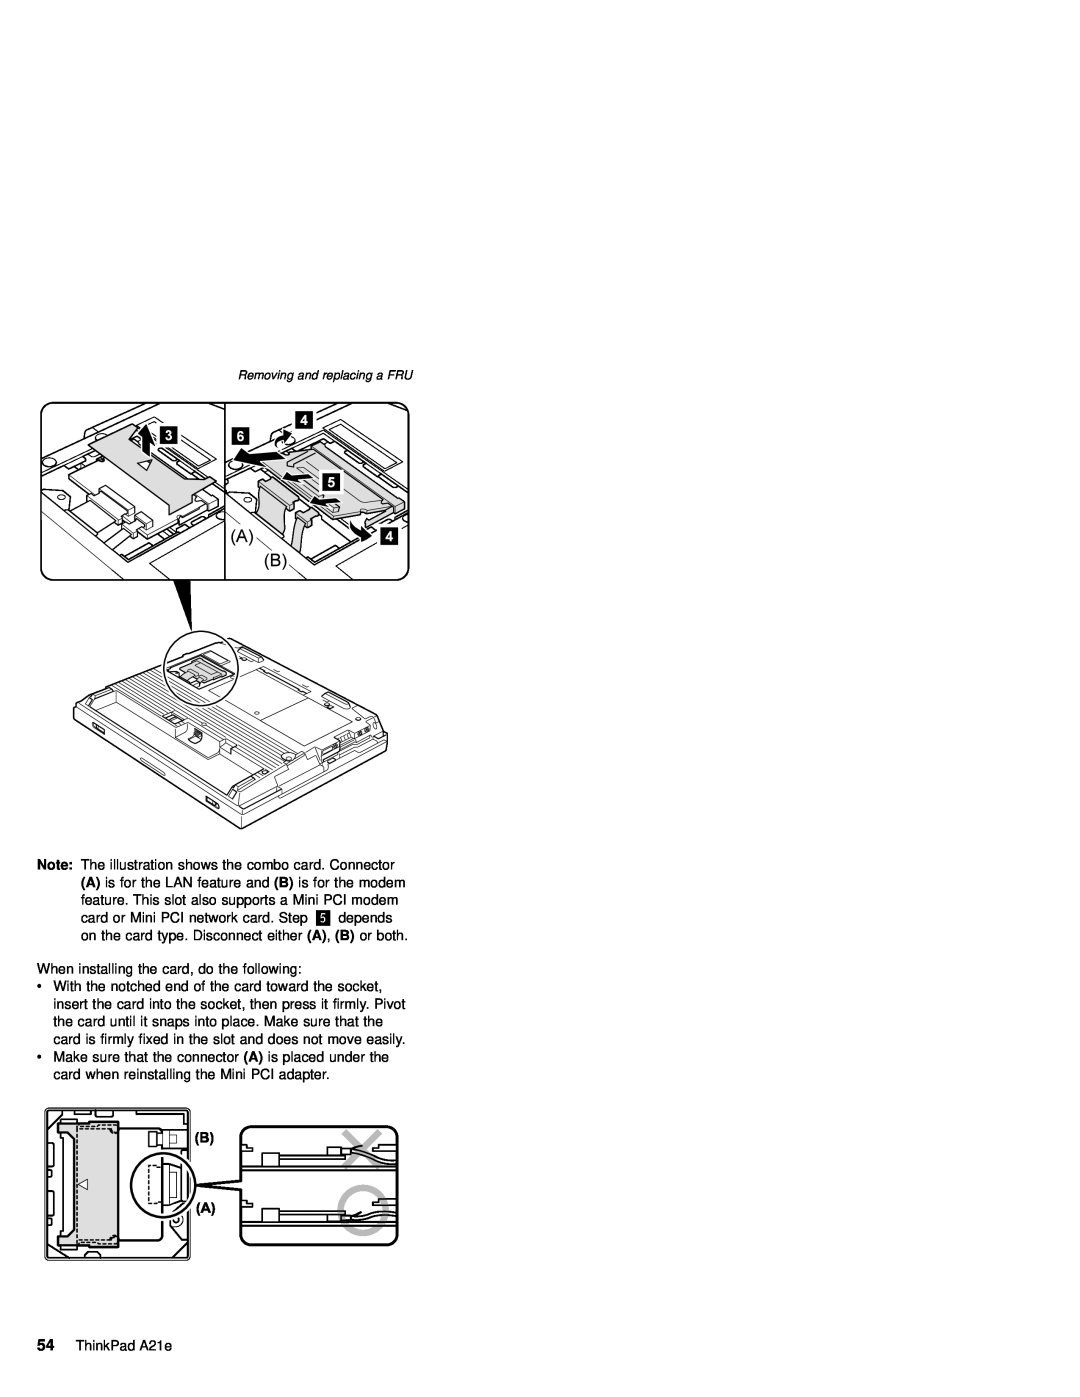 IBM MT 2632 manual Note The illustration shows the combo card. Connector 